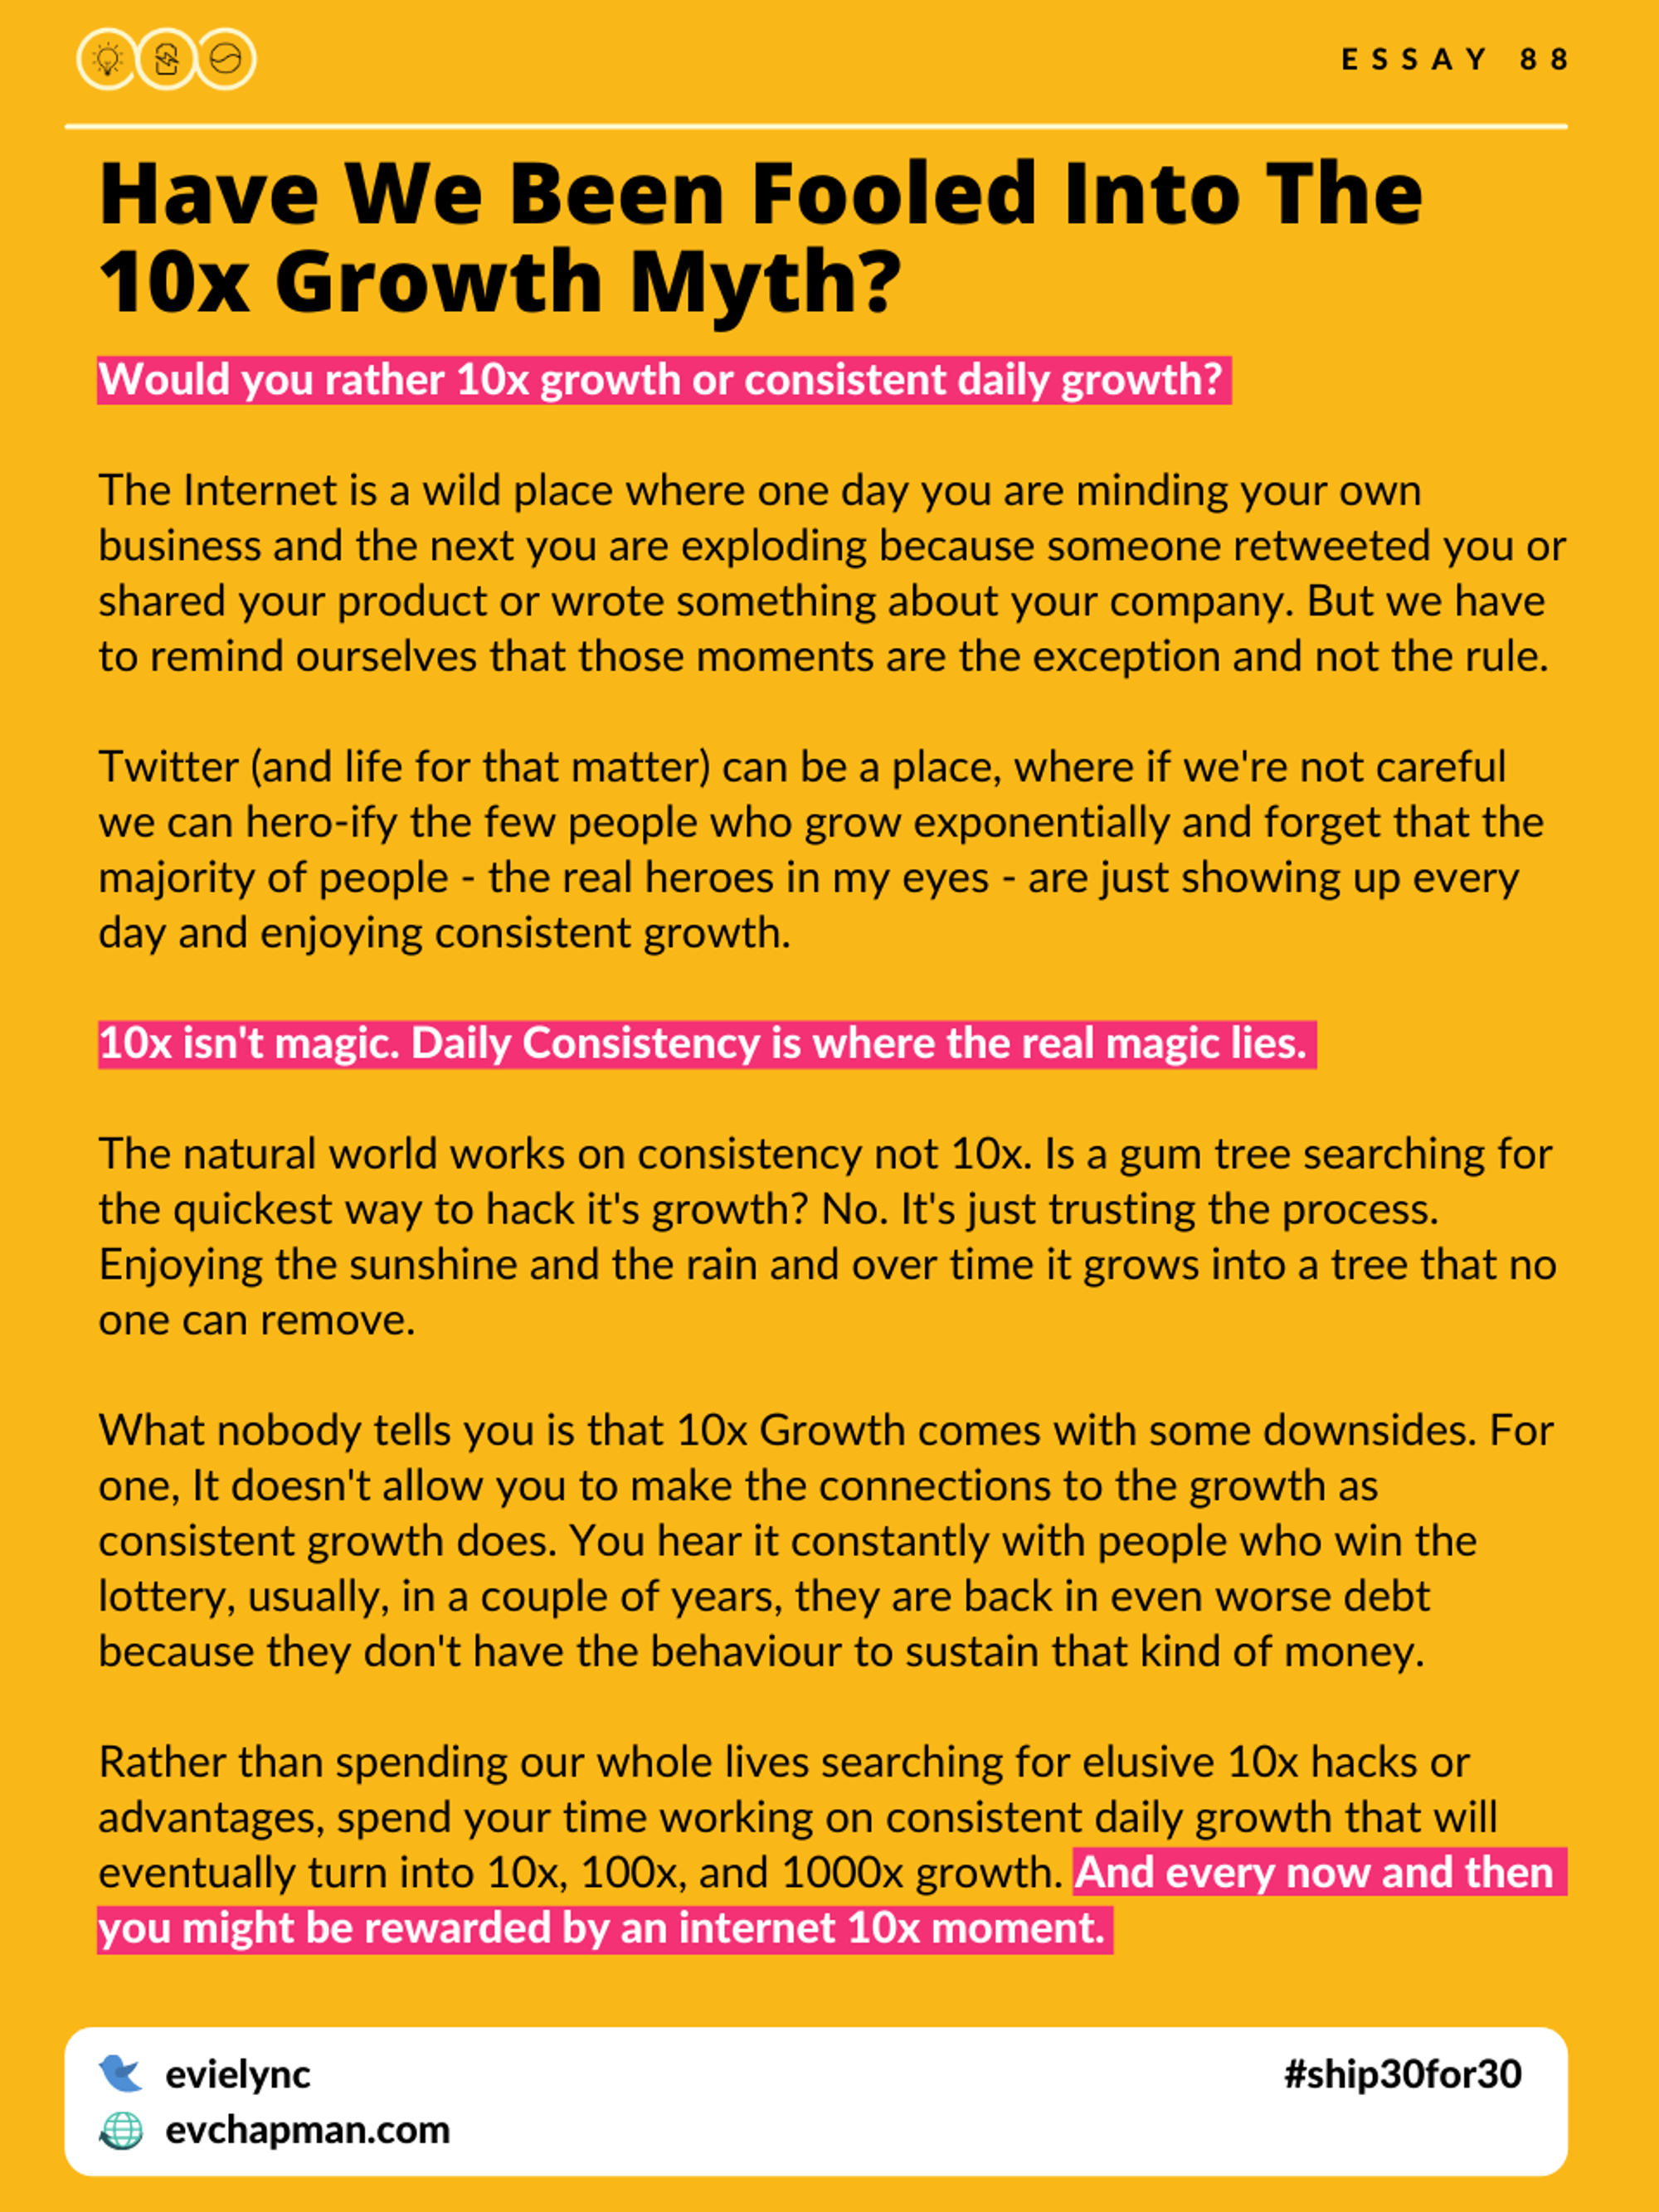 Have We Been Fooled Into The 10x Growth Myth?